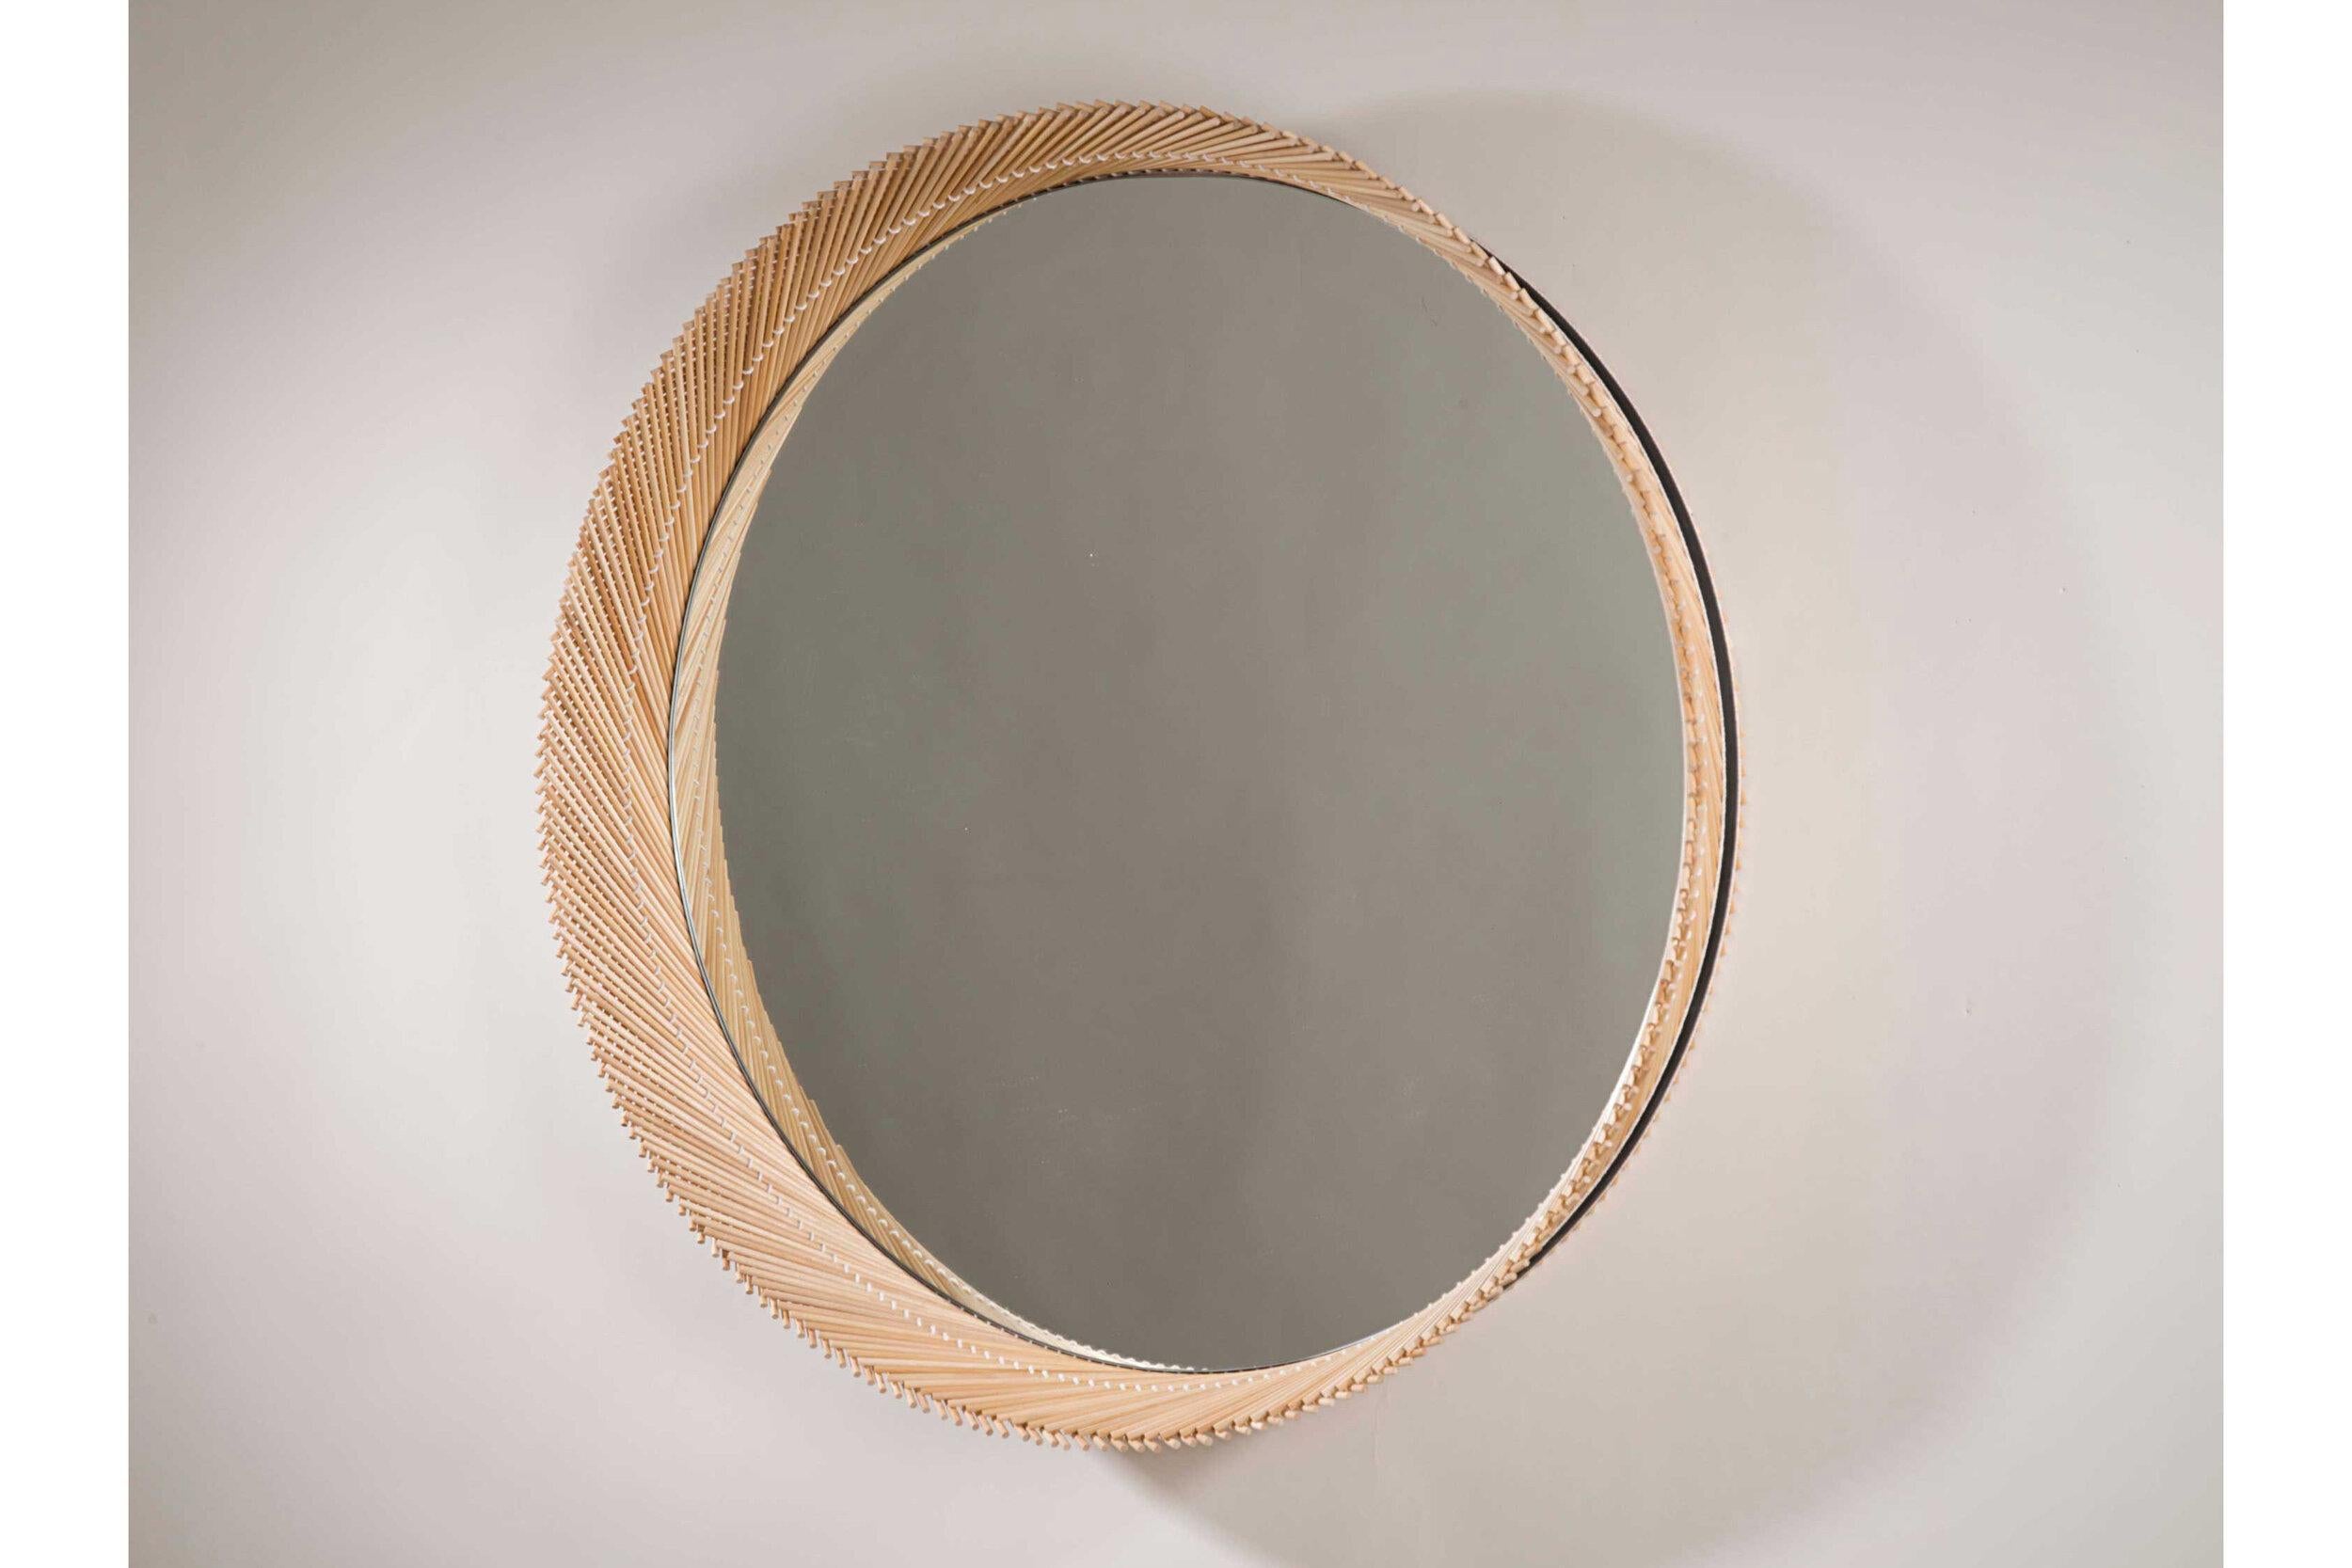 American Mooda Mirror Round 24 / Natural Maple Wood, Clear Mirror by INDO- For Sale